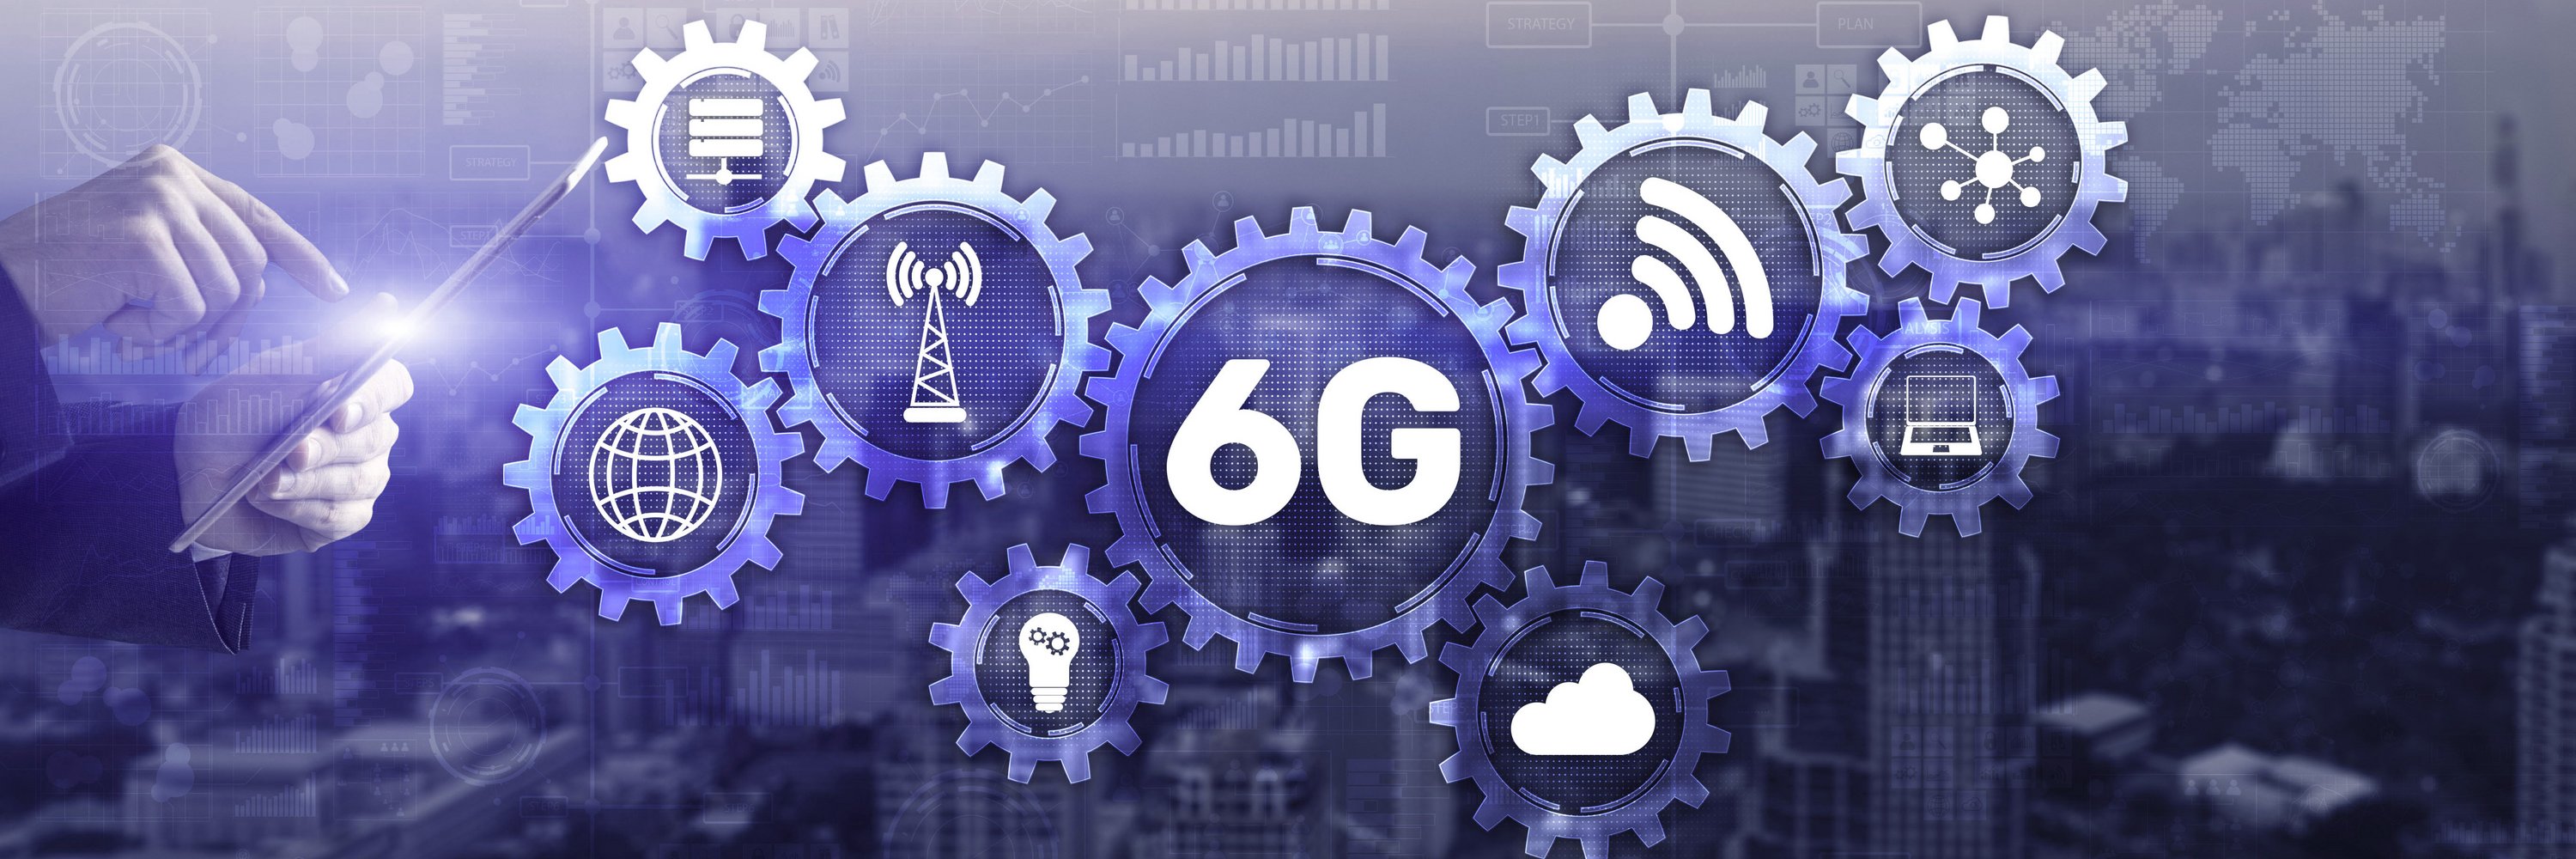 Stockfoto with different gears. In the biggest one in the middle "6G" is written. Around are icons such as a cloud, a network, a globe etc.